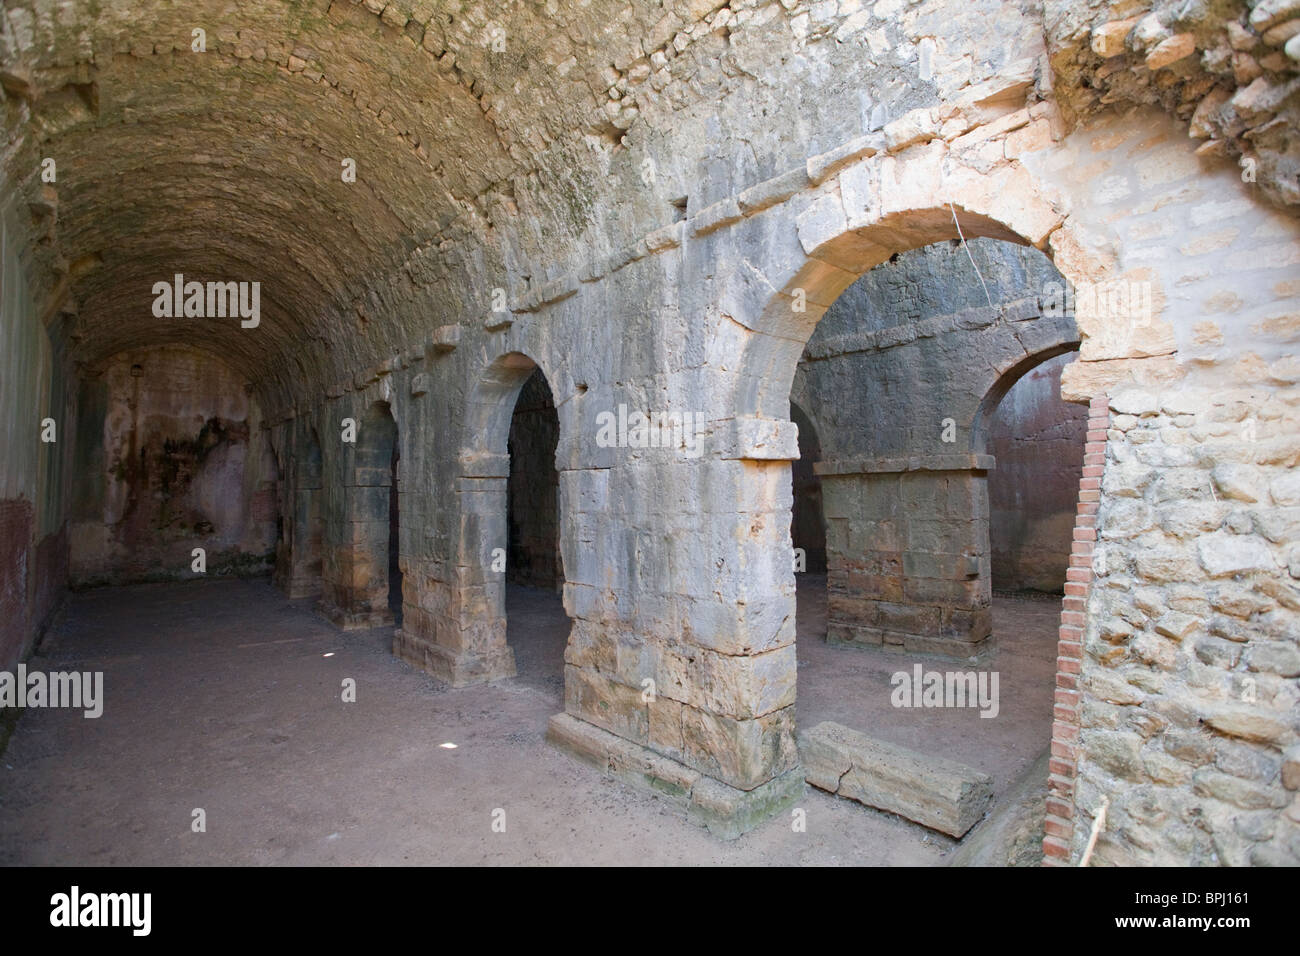 3-parted Roman cisterns at the Aptera ancient ruins, Crete, Greece Stock Photo